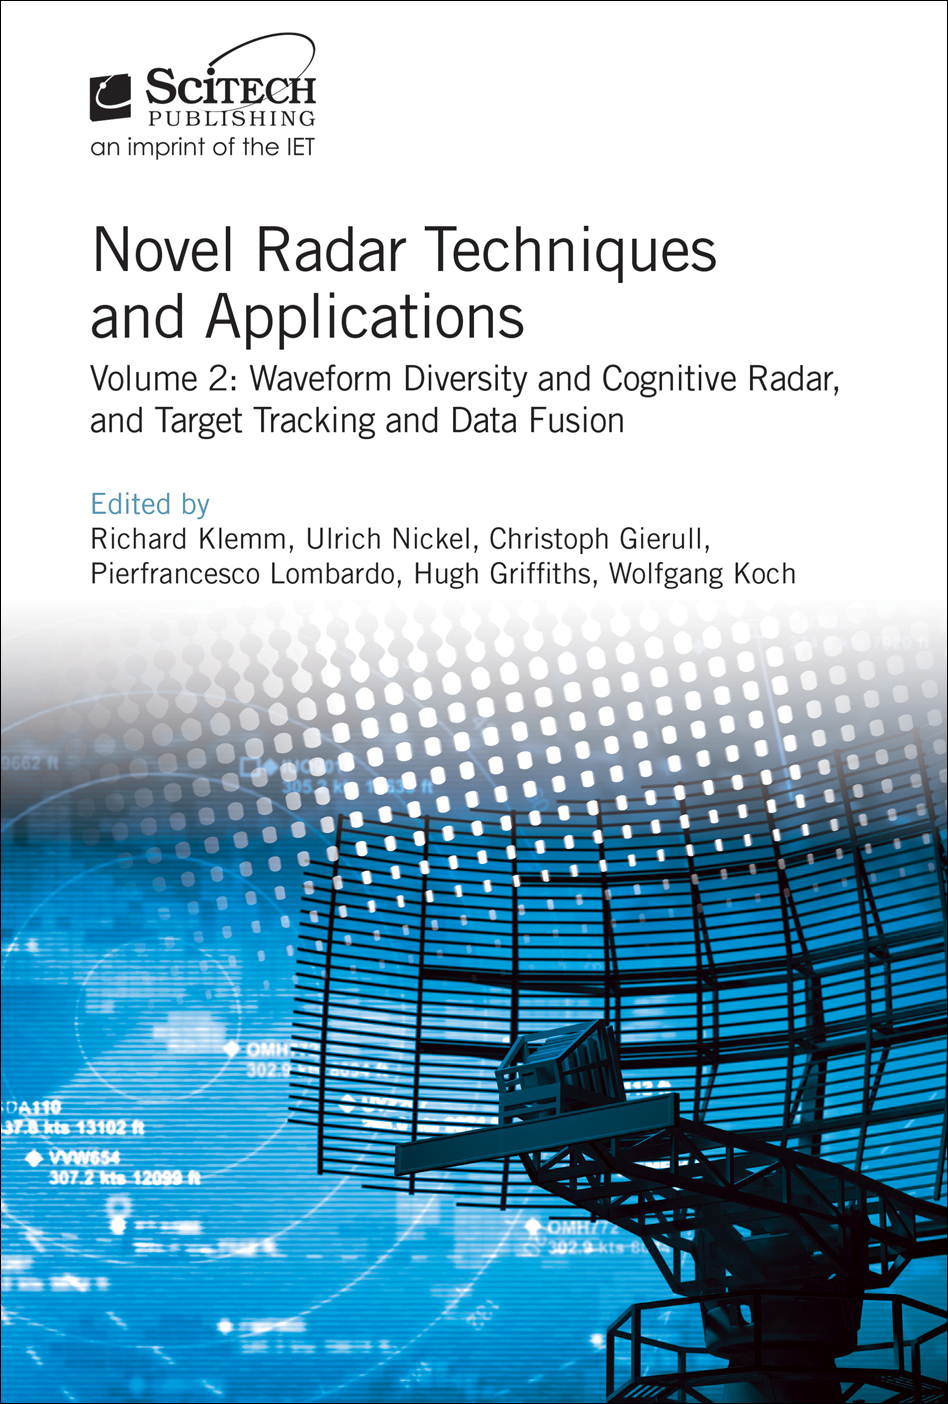 Novel Radar Techniques and Applications, Volume 2: Waveform diversity and cognitive radar and Target tracking and data fusion